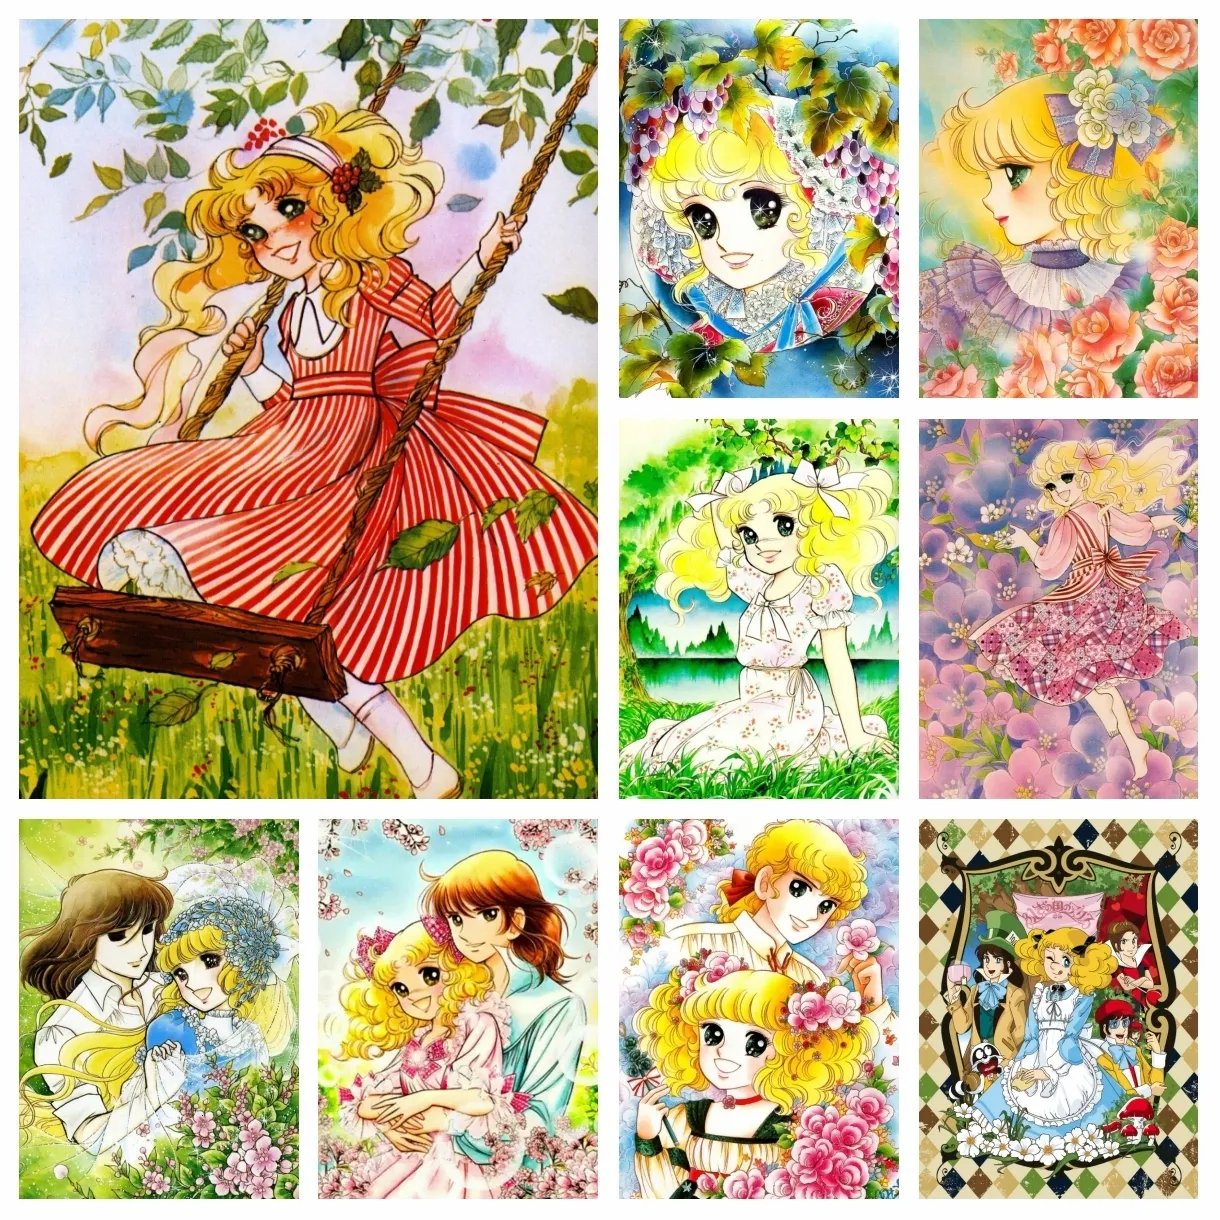 Japanese Cartoon Anime Diamond Painting Sailor Moon Kit Candy Girl Flower  Art Cross Stitch Embroidery Picture Mosaic Craft For Home Decor From Tuo10,  $11.97